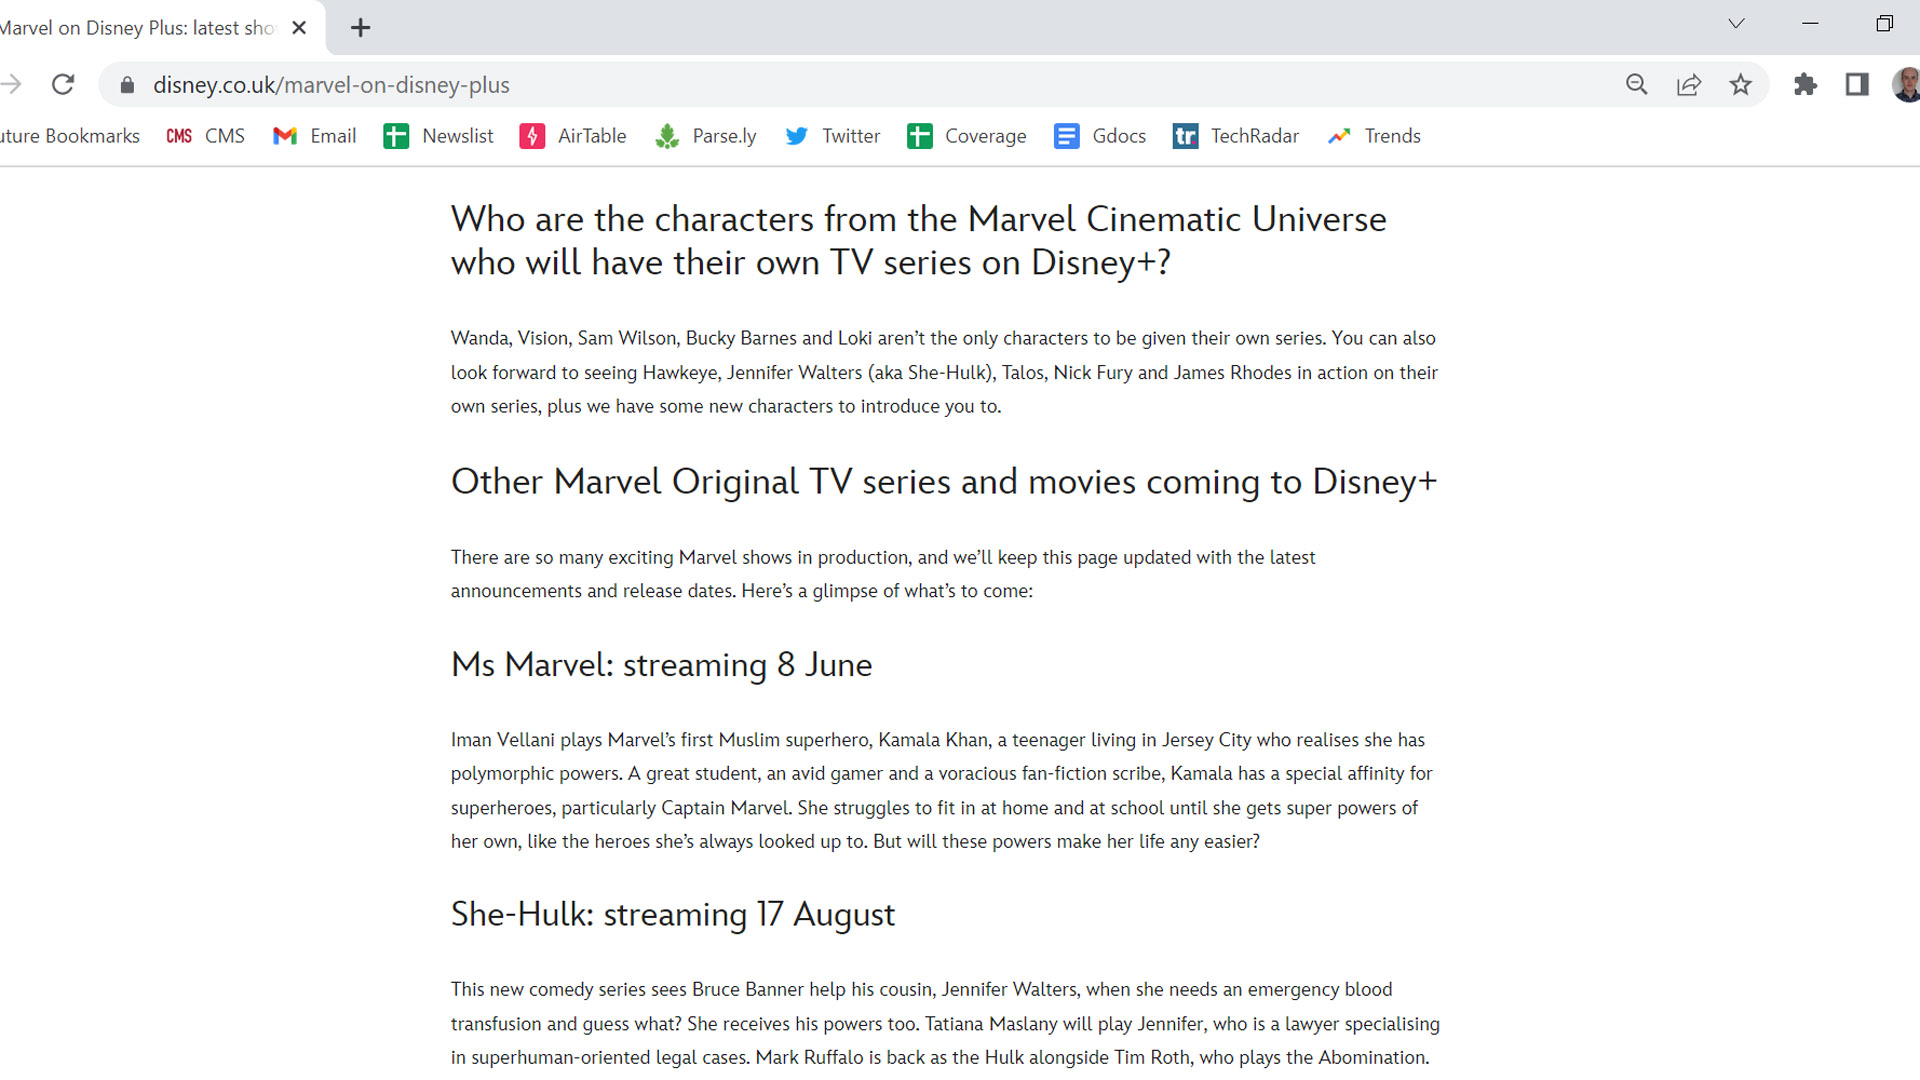 A screenshot showing the leaked release date of Marvel Studios' She-Hulk TV show